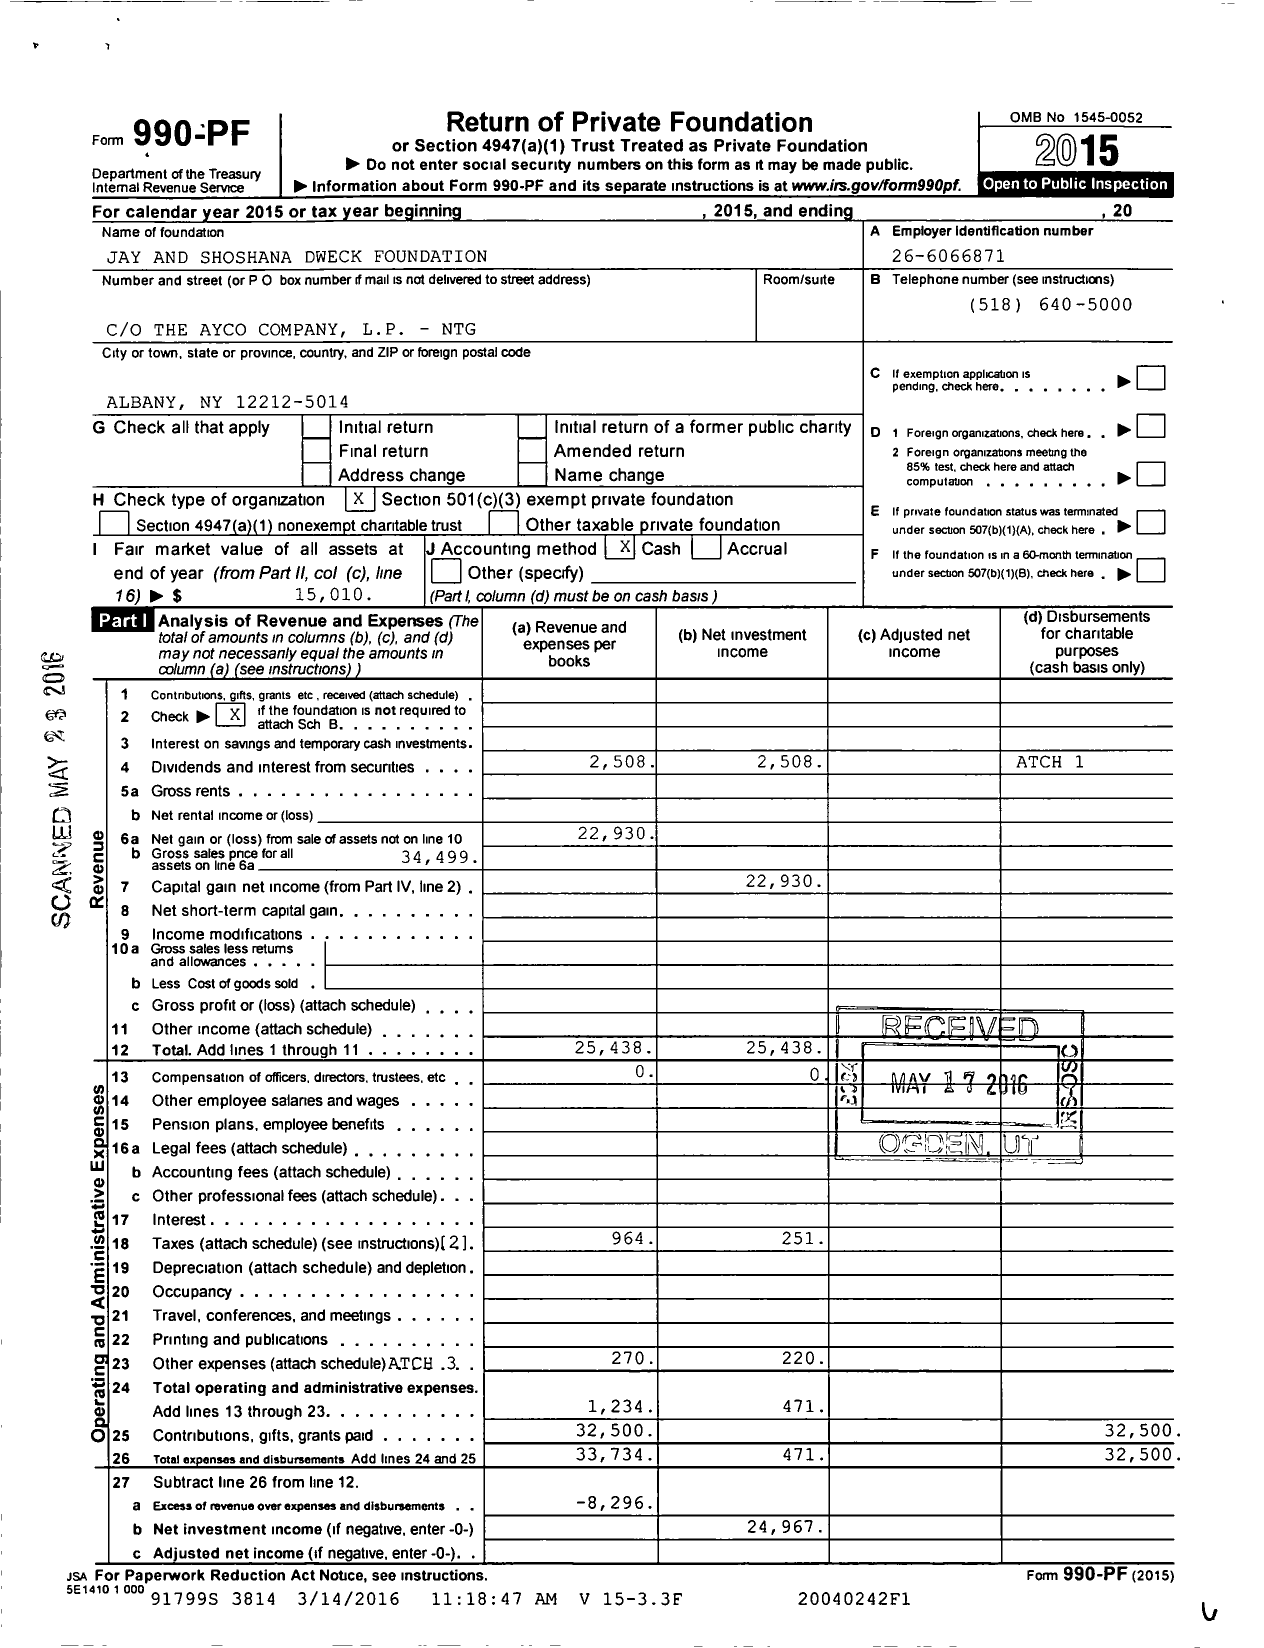 Image of first page of 2015 Form 990PF for Jay and Shoshana Dweck Foundation